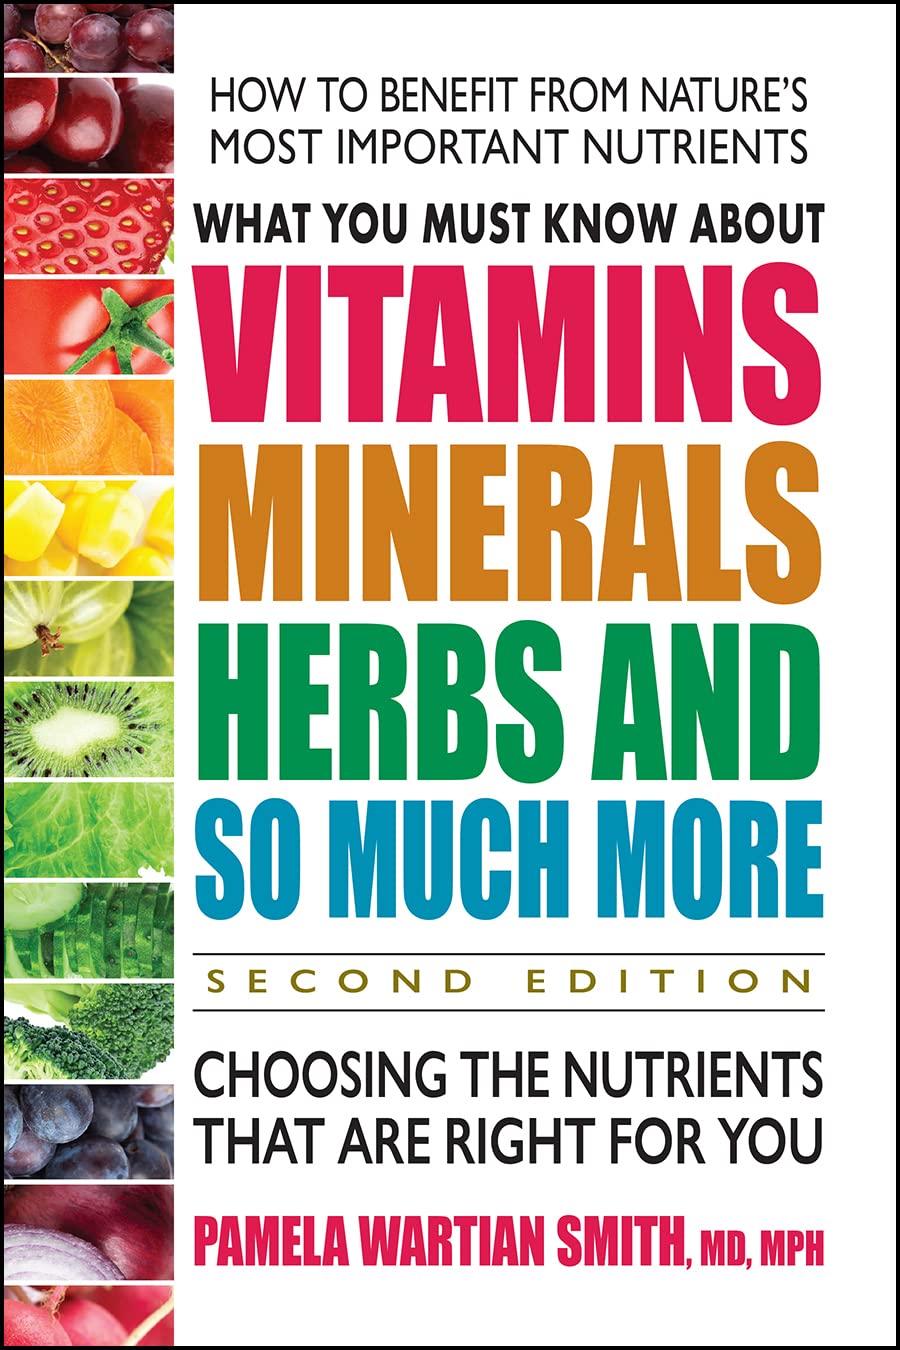 What You Must Know about Vitamins, Minerals, Herbs and So Much More Second Edition: Choosing the Nutrients That Are Right for You - SureShot Books Publishing LLC